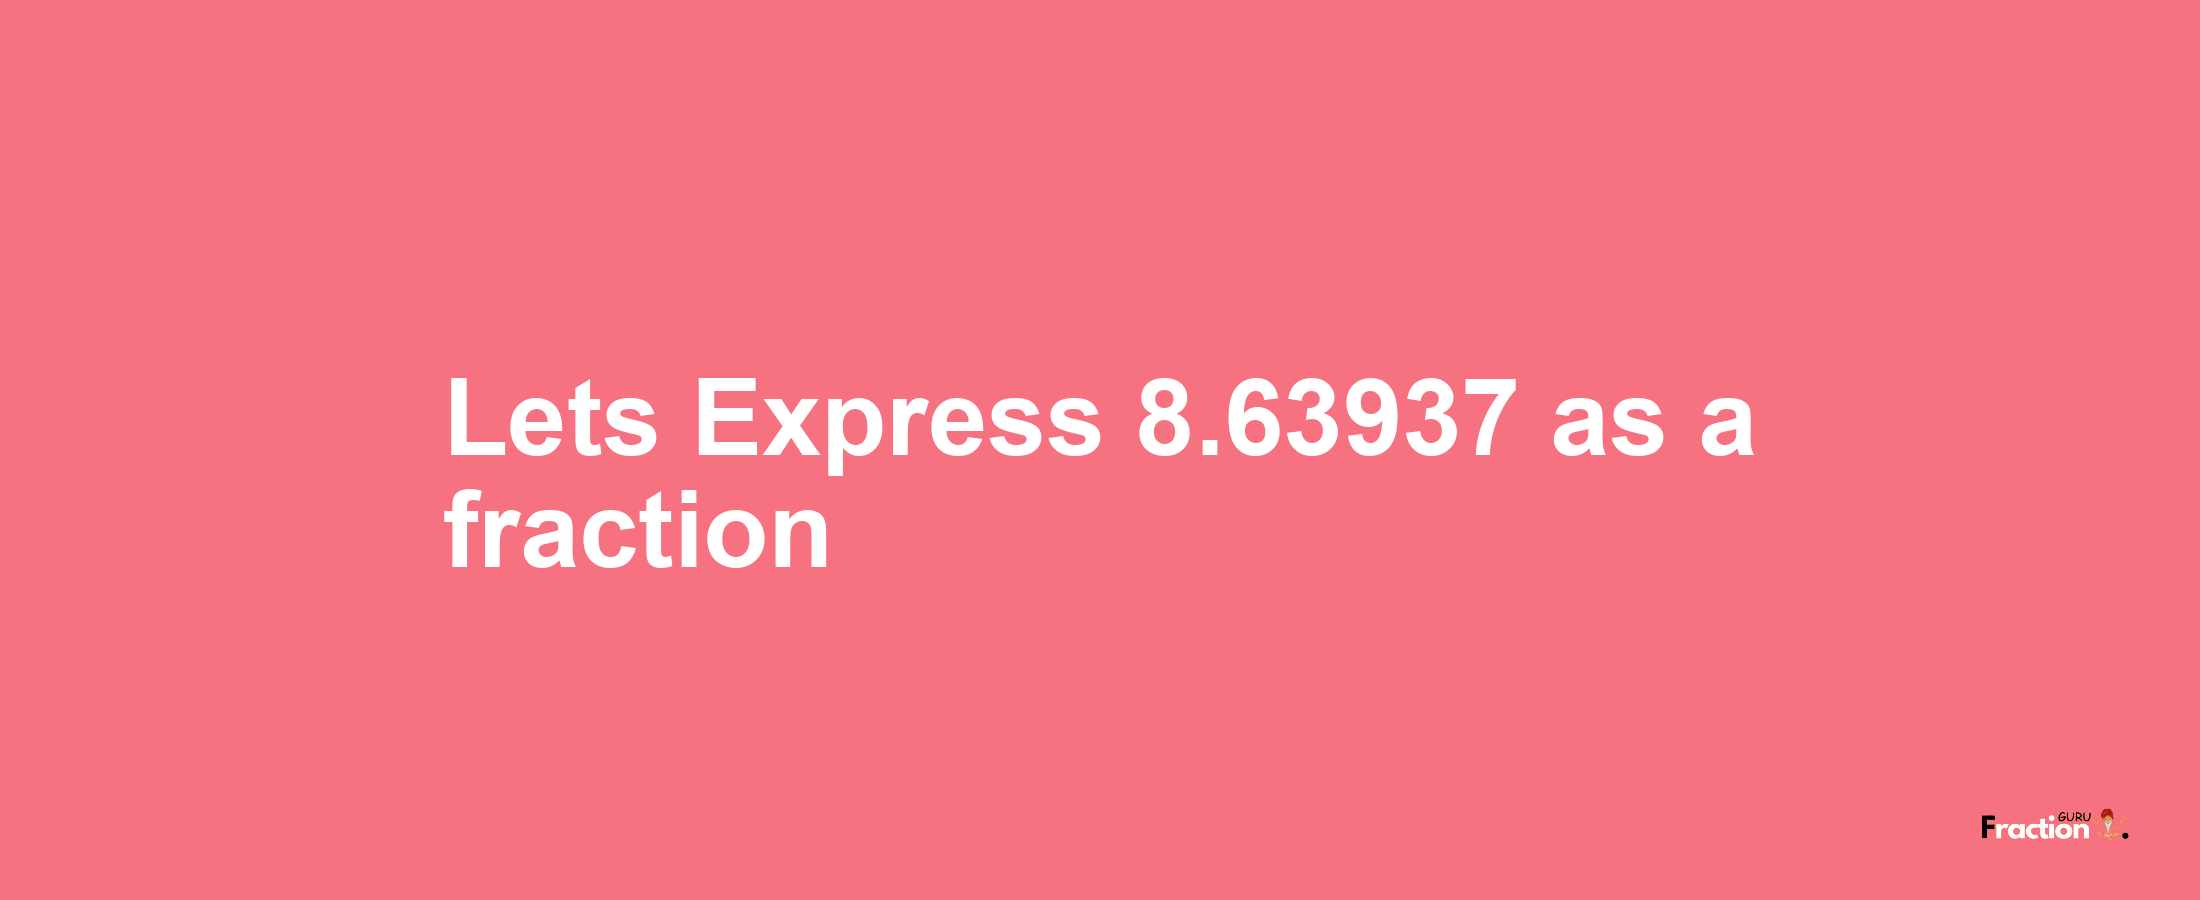 Lets Express 8.63937 as afraction